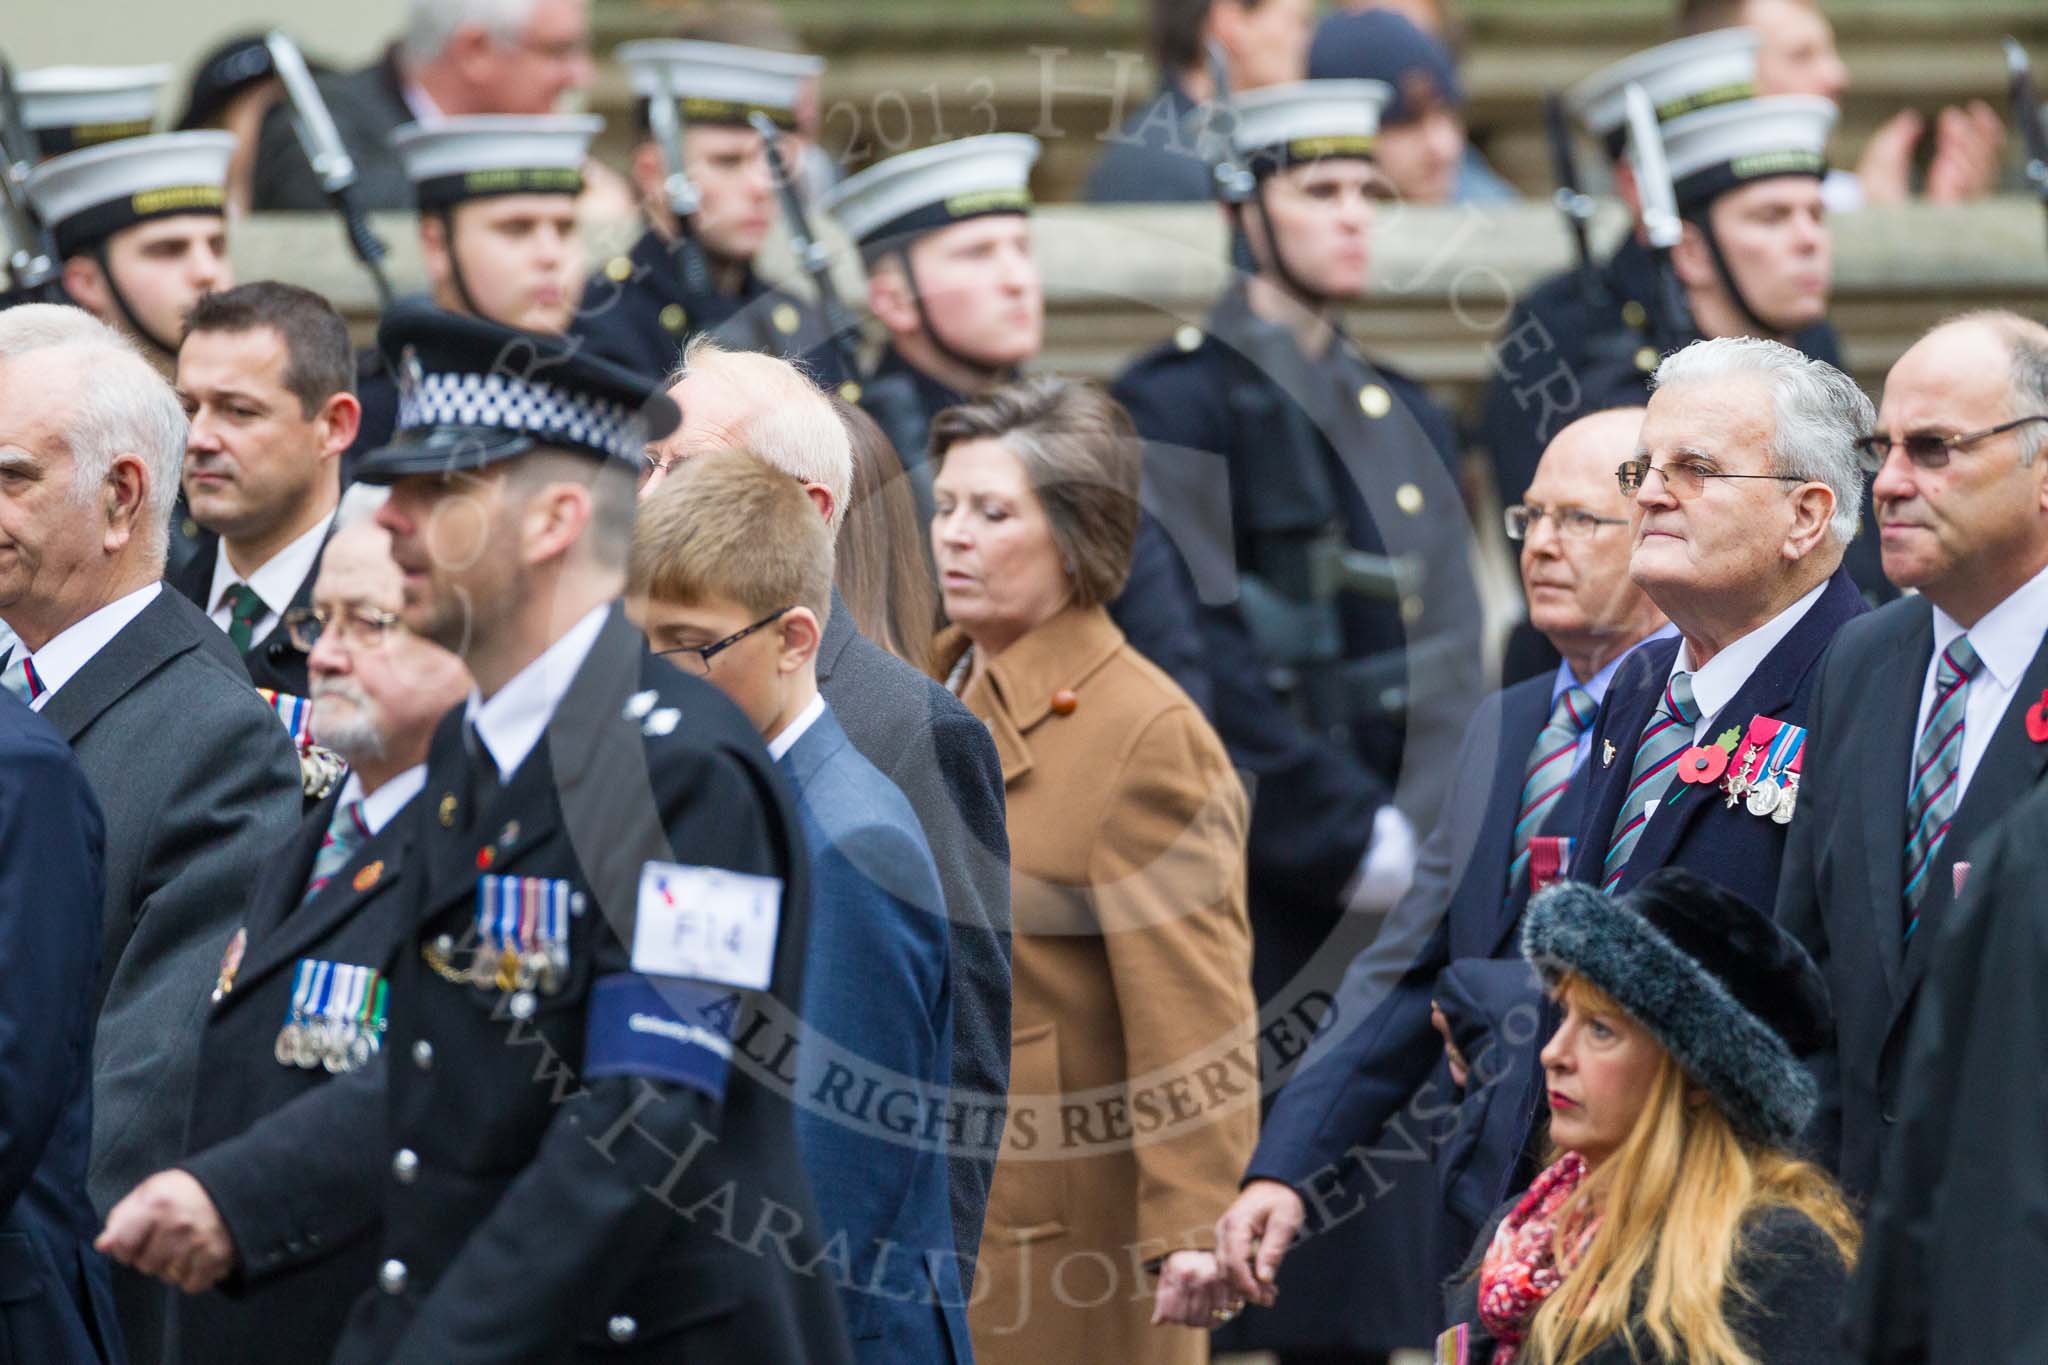 Remembrance Sunday at the Cenotaph 2015: Group F14, Gallantry Medallists League.
Cenotaph, Whitehall, London SW1,
London,
Greater London,
United Kingdom,
on 08 November 2015 at 12:05, image #1068